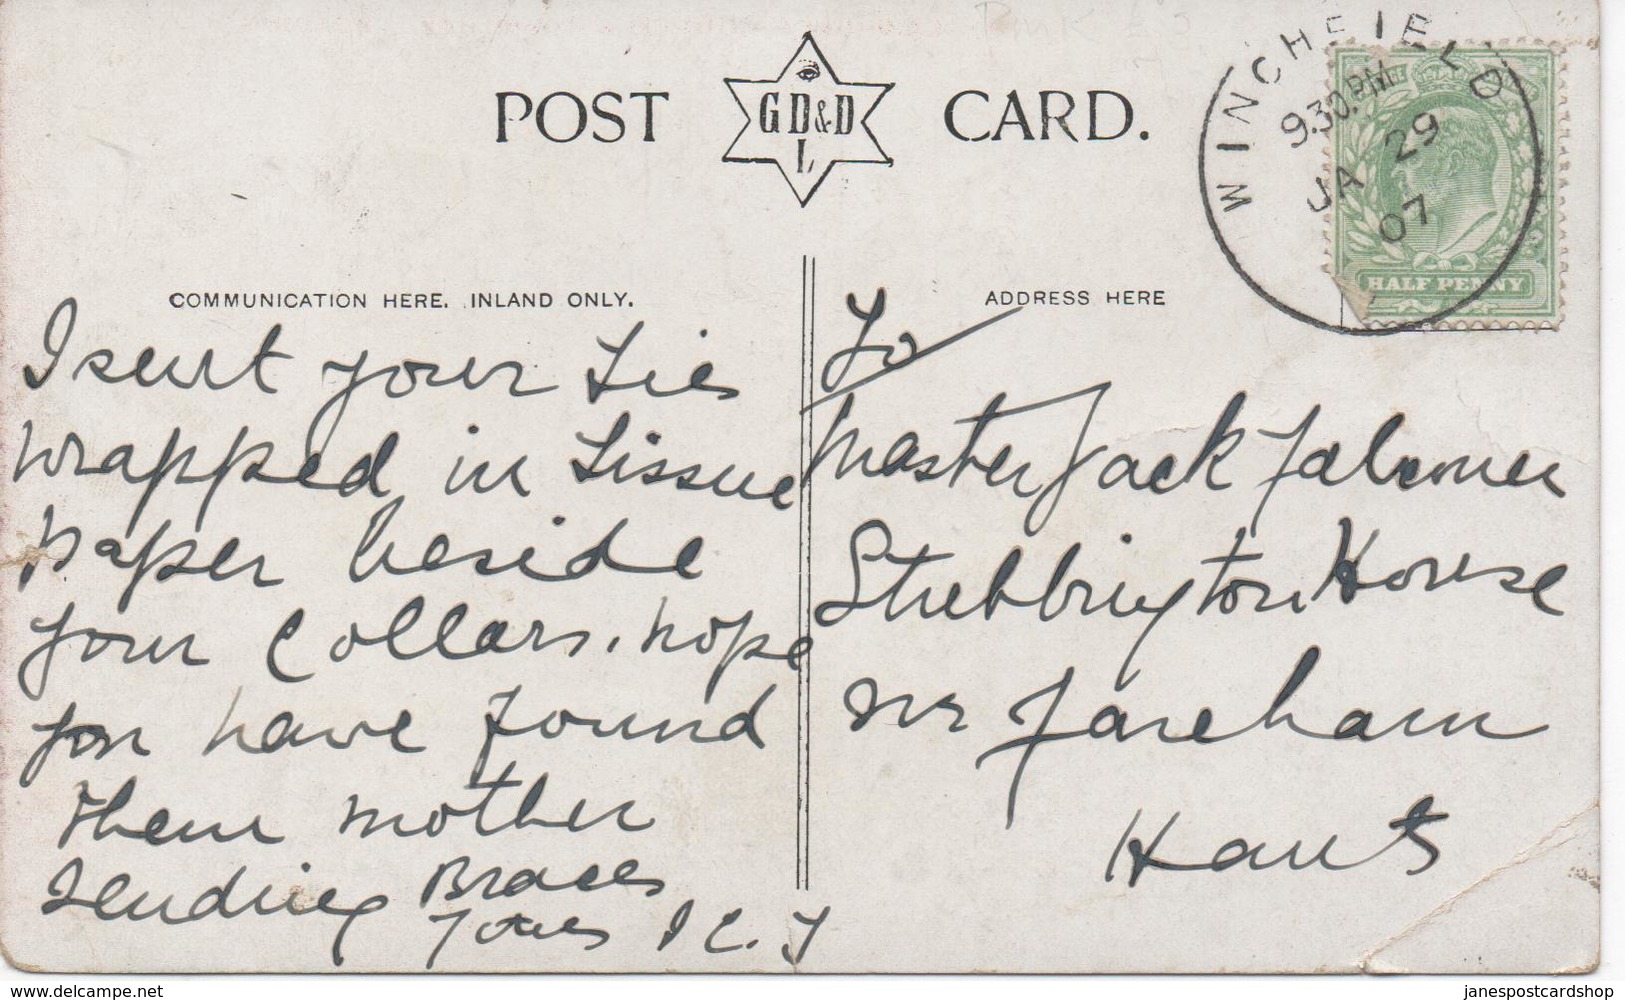 ST. LAWRENCE CHURCH & TOWN HALL - READING With WINCHFIELD Skeleton Postmark - Reading